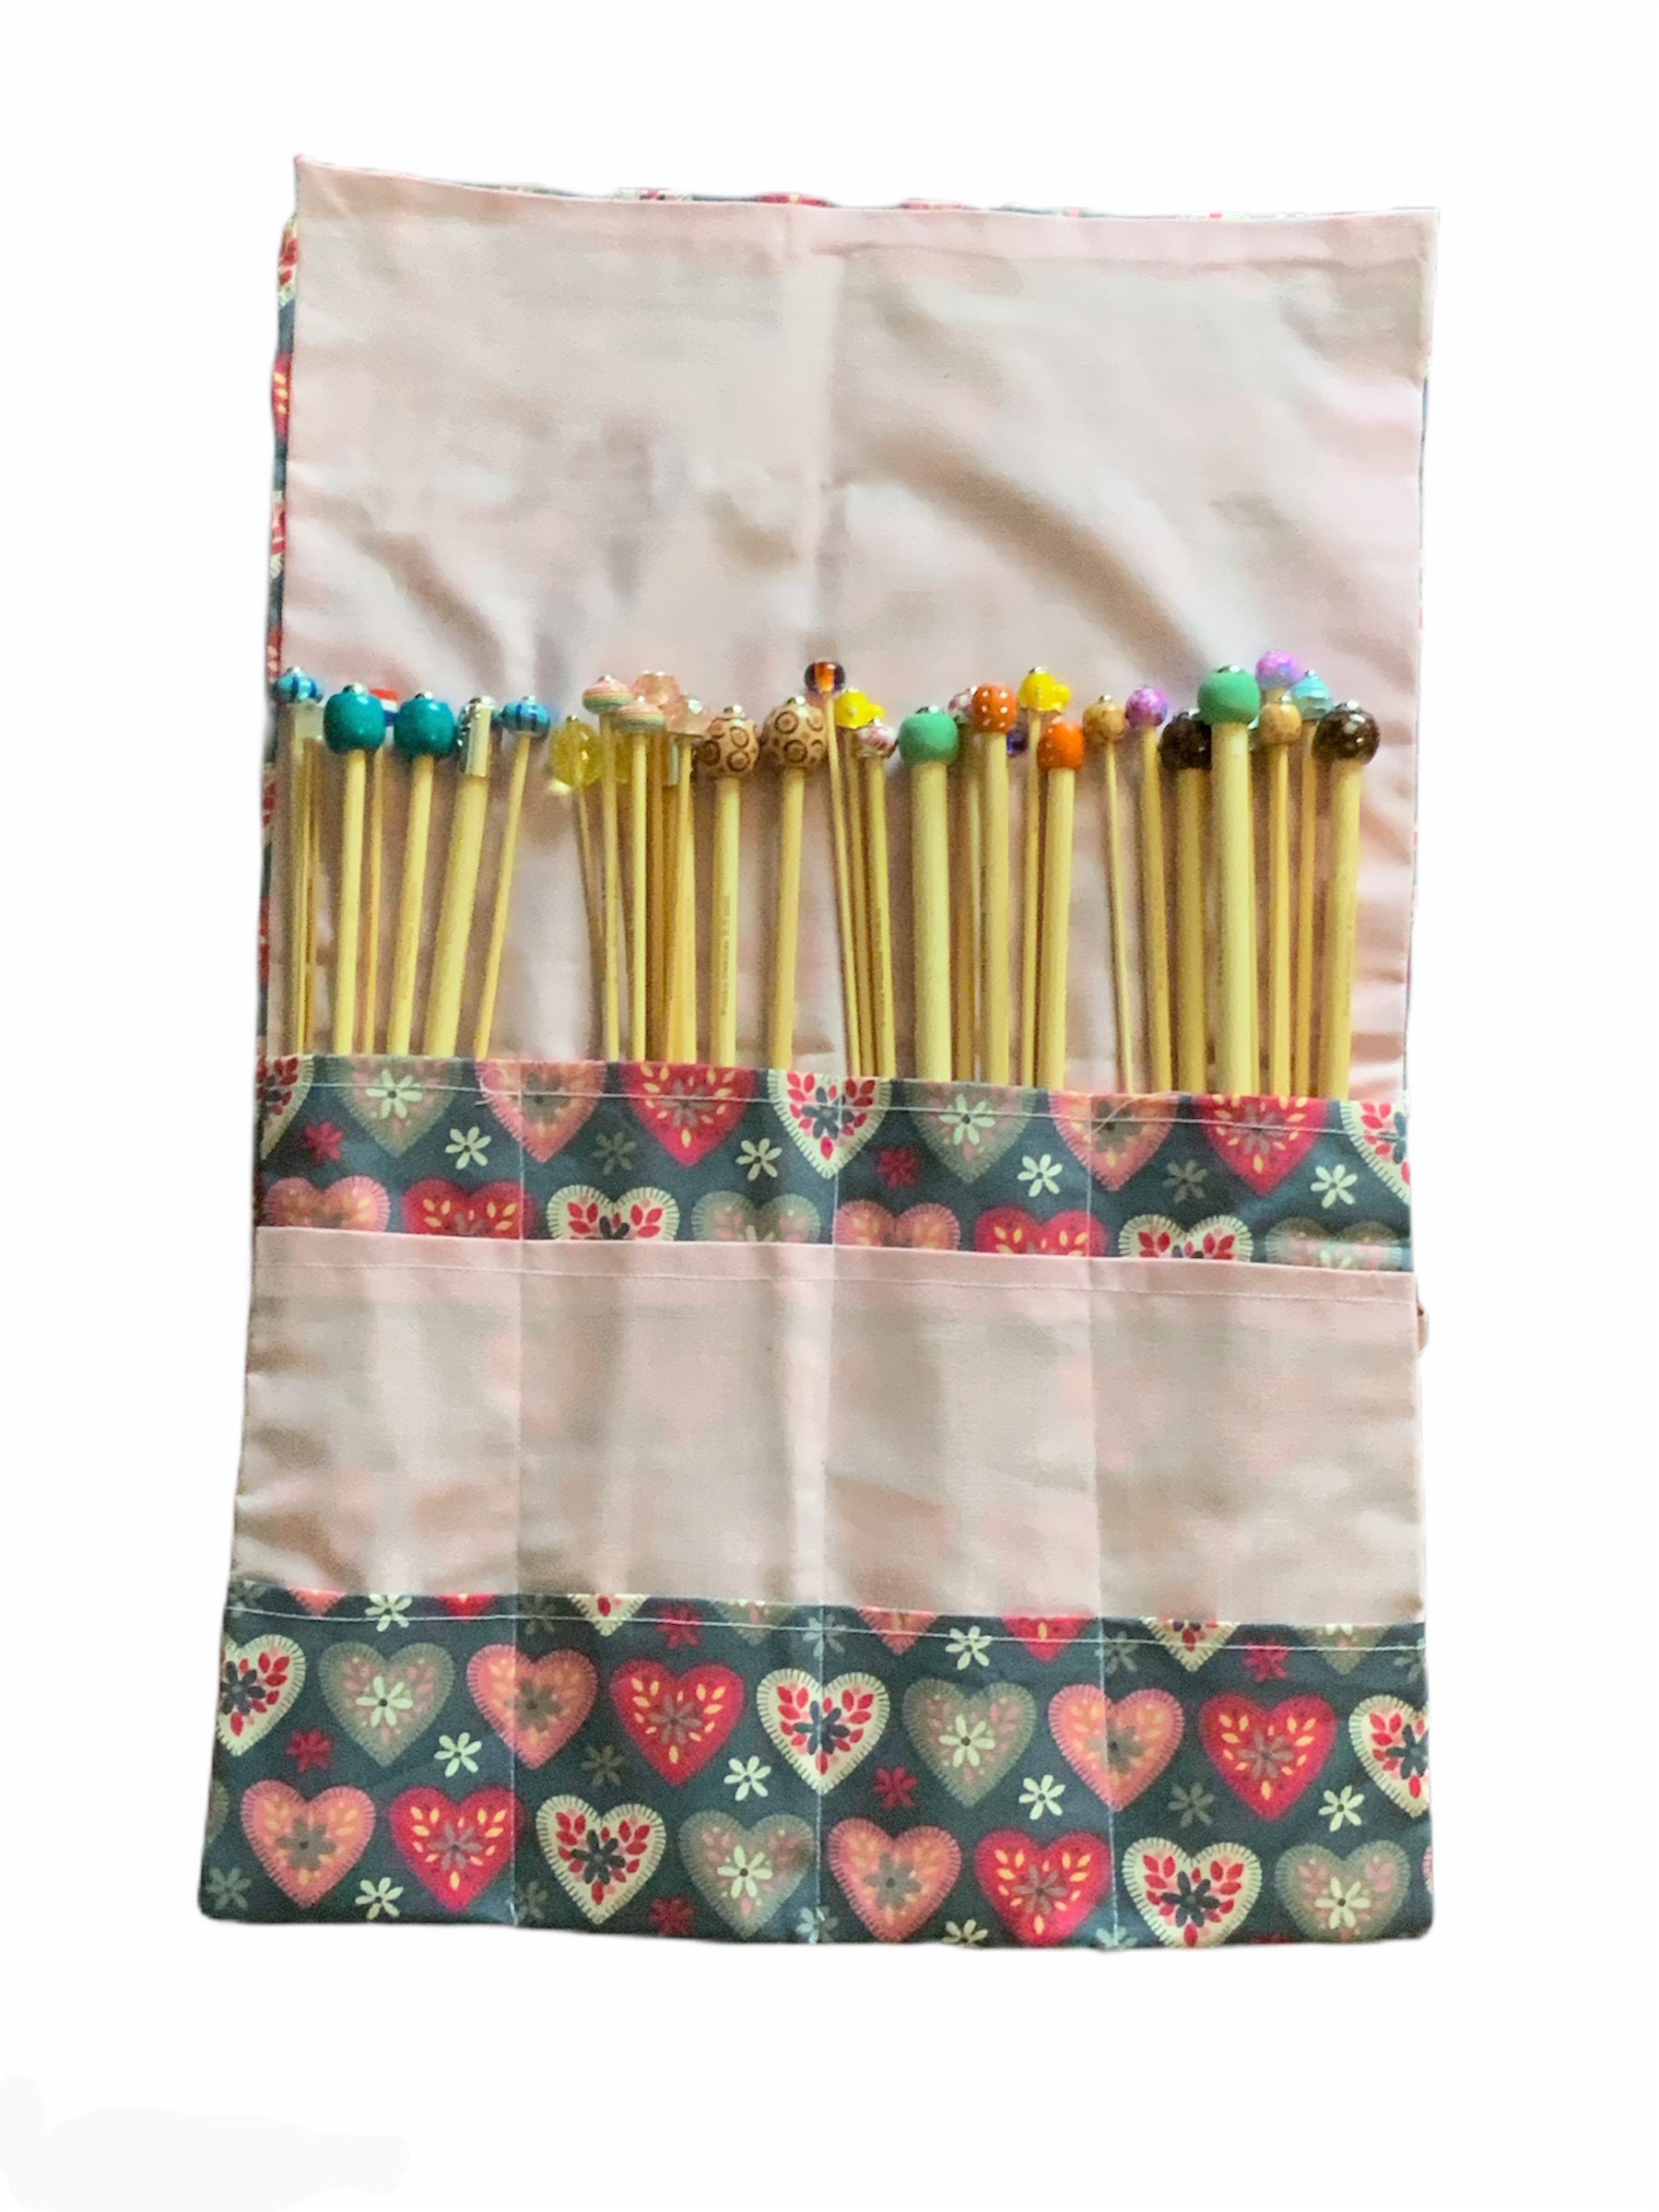 Full Set Of Beaded Knitting Needles Choose Length - Complete With Extras